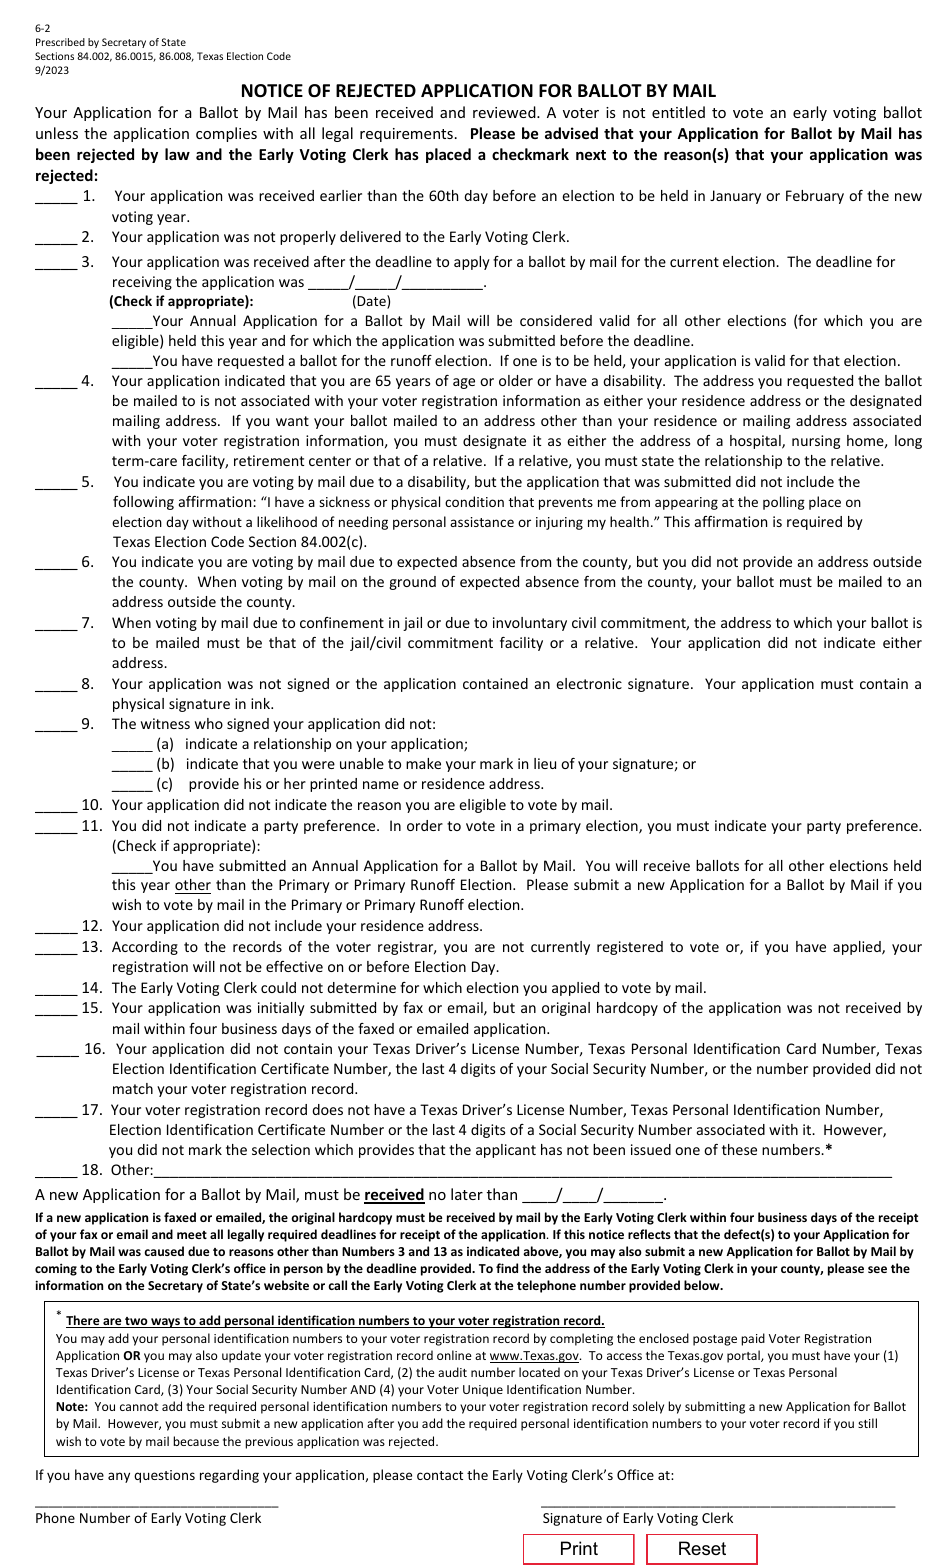 Form 6-2 Notice of Rejected Application for Ballot by Mail - Texas (English / Spanish), Page 1